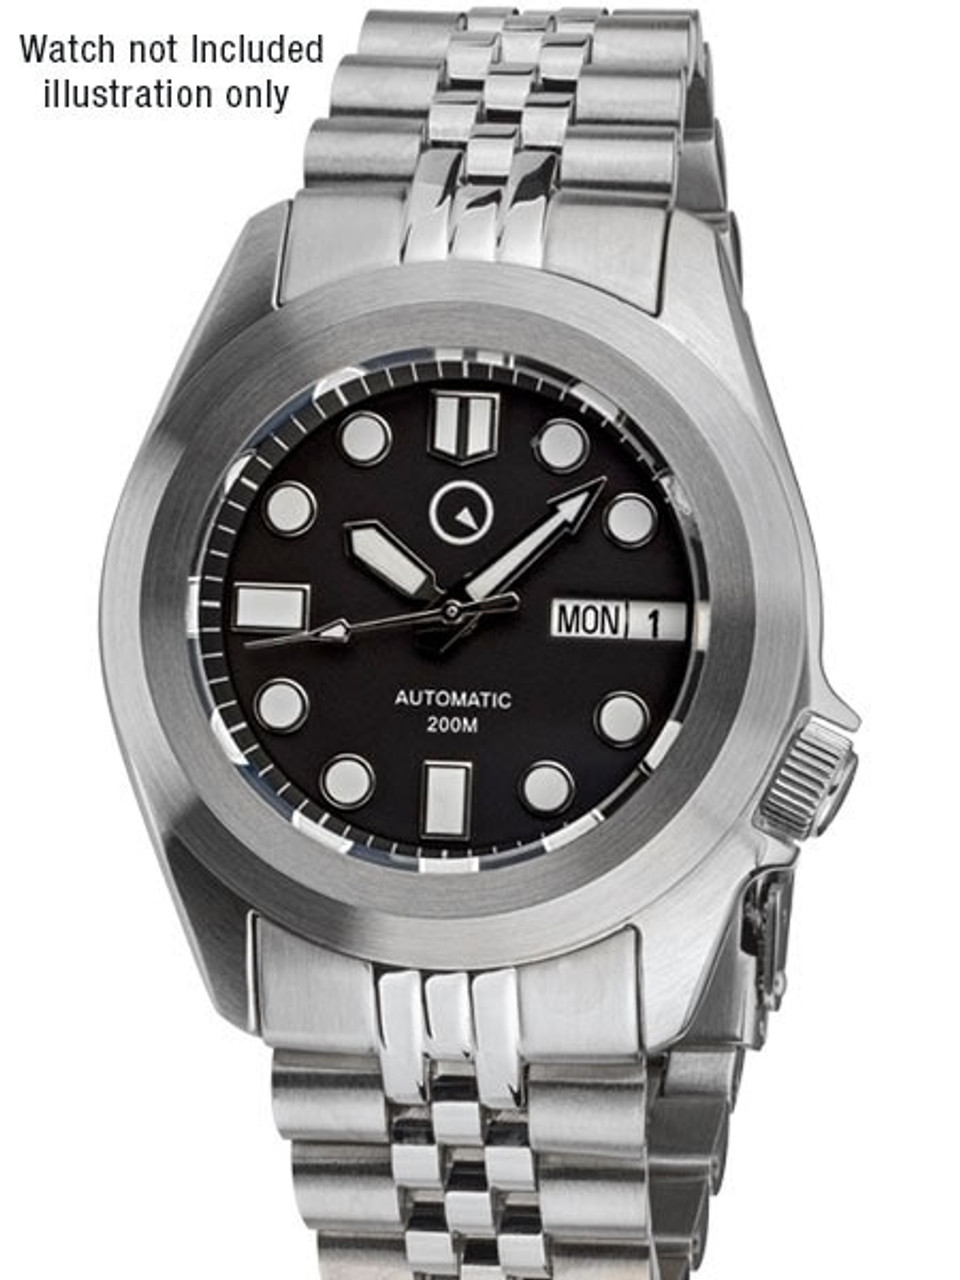 Brushed Finish SS, Unmarked Bezel for Seiko SKX013 and Islander 38mm dive  watches #B14-M